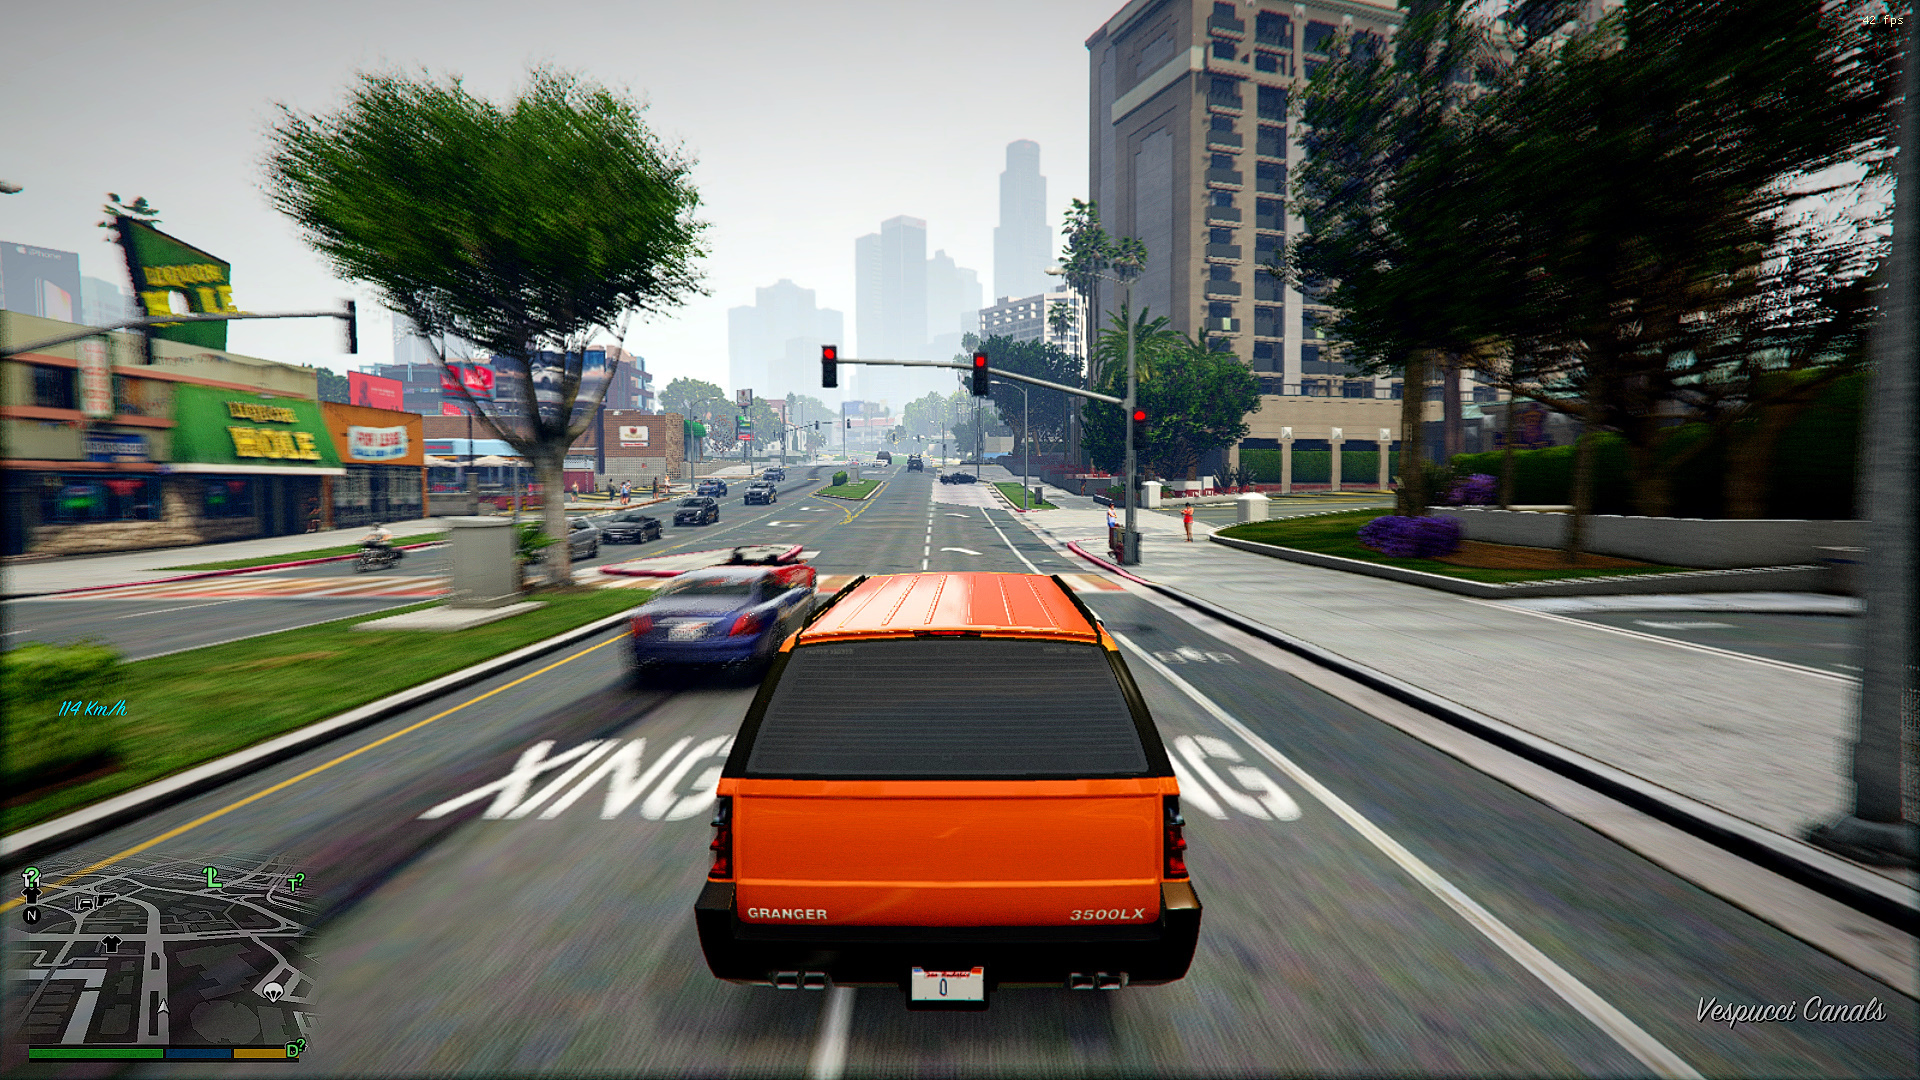 THE BEST GTA 5 GRAPHICS MOD FOR LOW-END PC? 2021